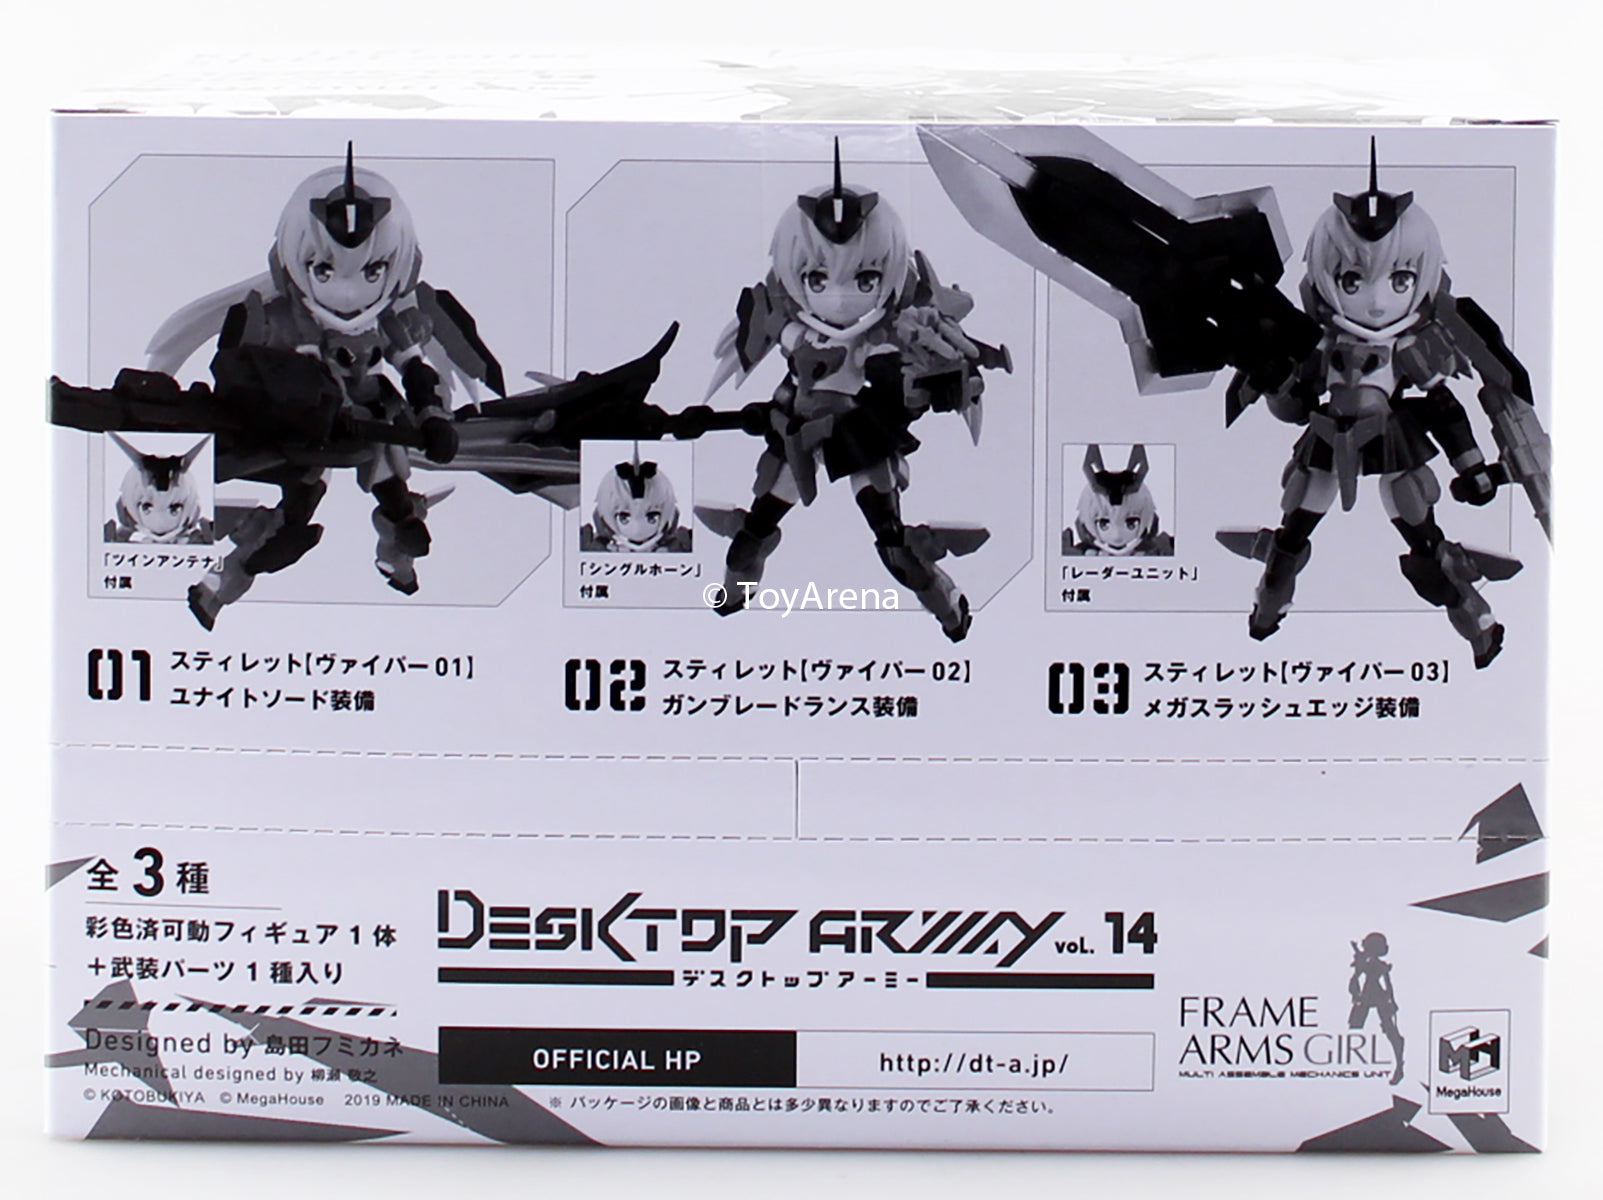 Desktop Army Frame Arms Girl KT-116f Stylet Series Trading Figures Box Set of 3